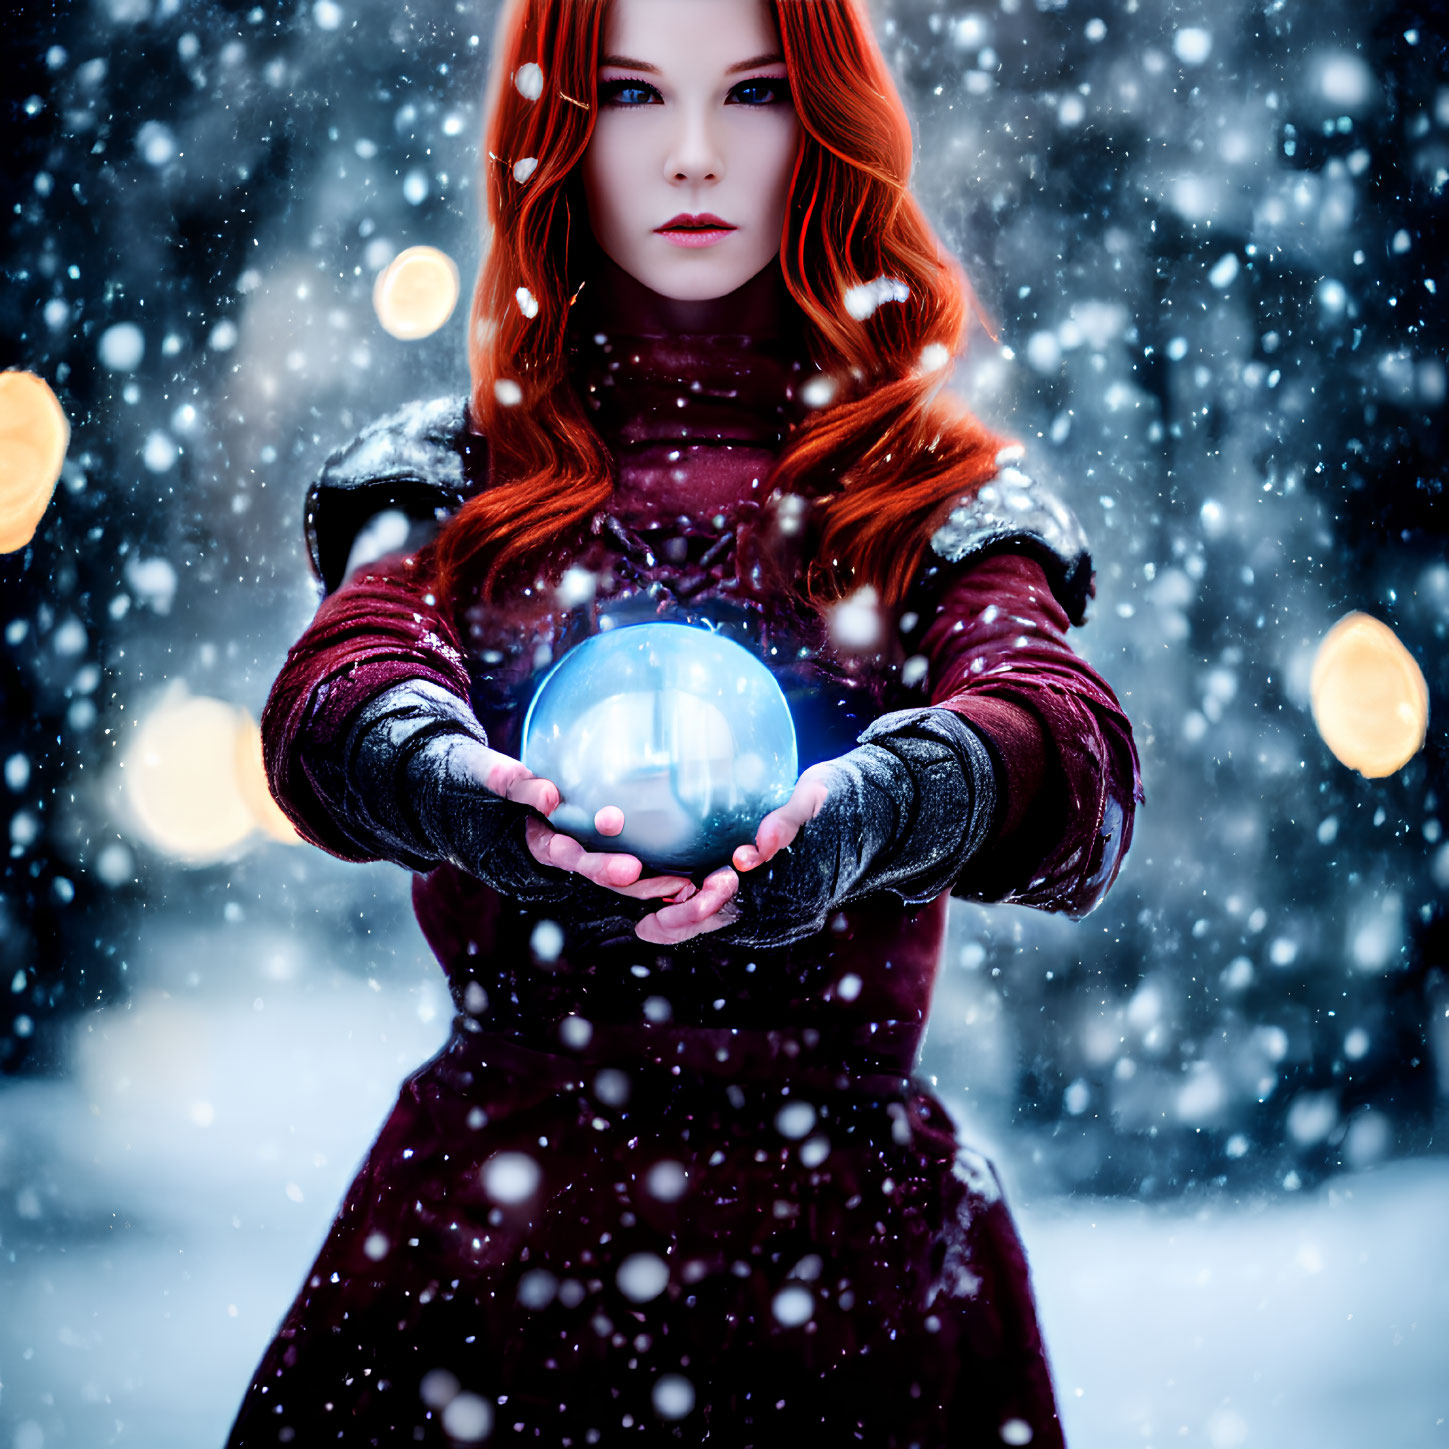 Red-haired woman in burgundy outfit holding glowing orb in snowfall with bokeh lights.